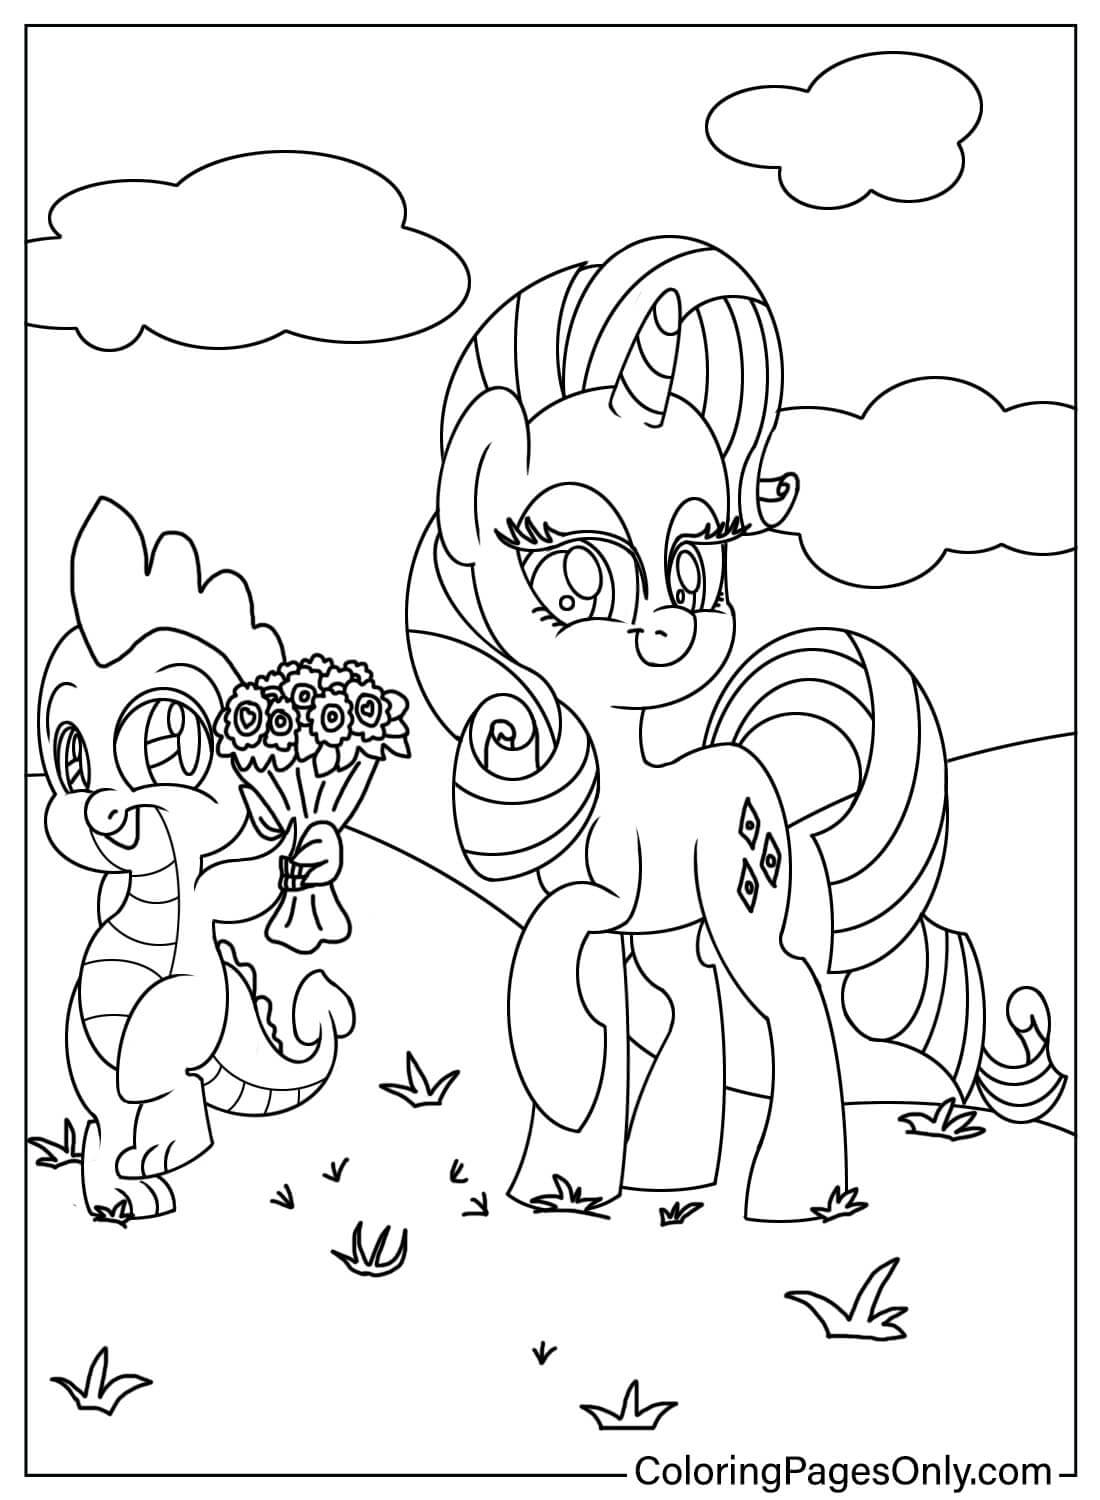 Spike and Rarity Coloring Page from Rarity